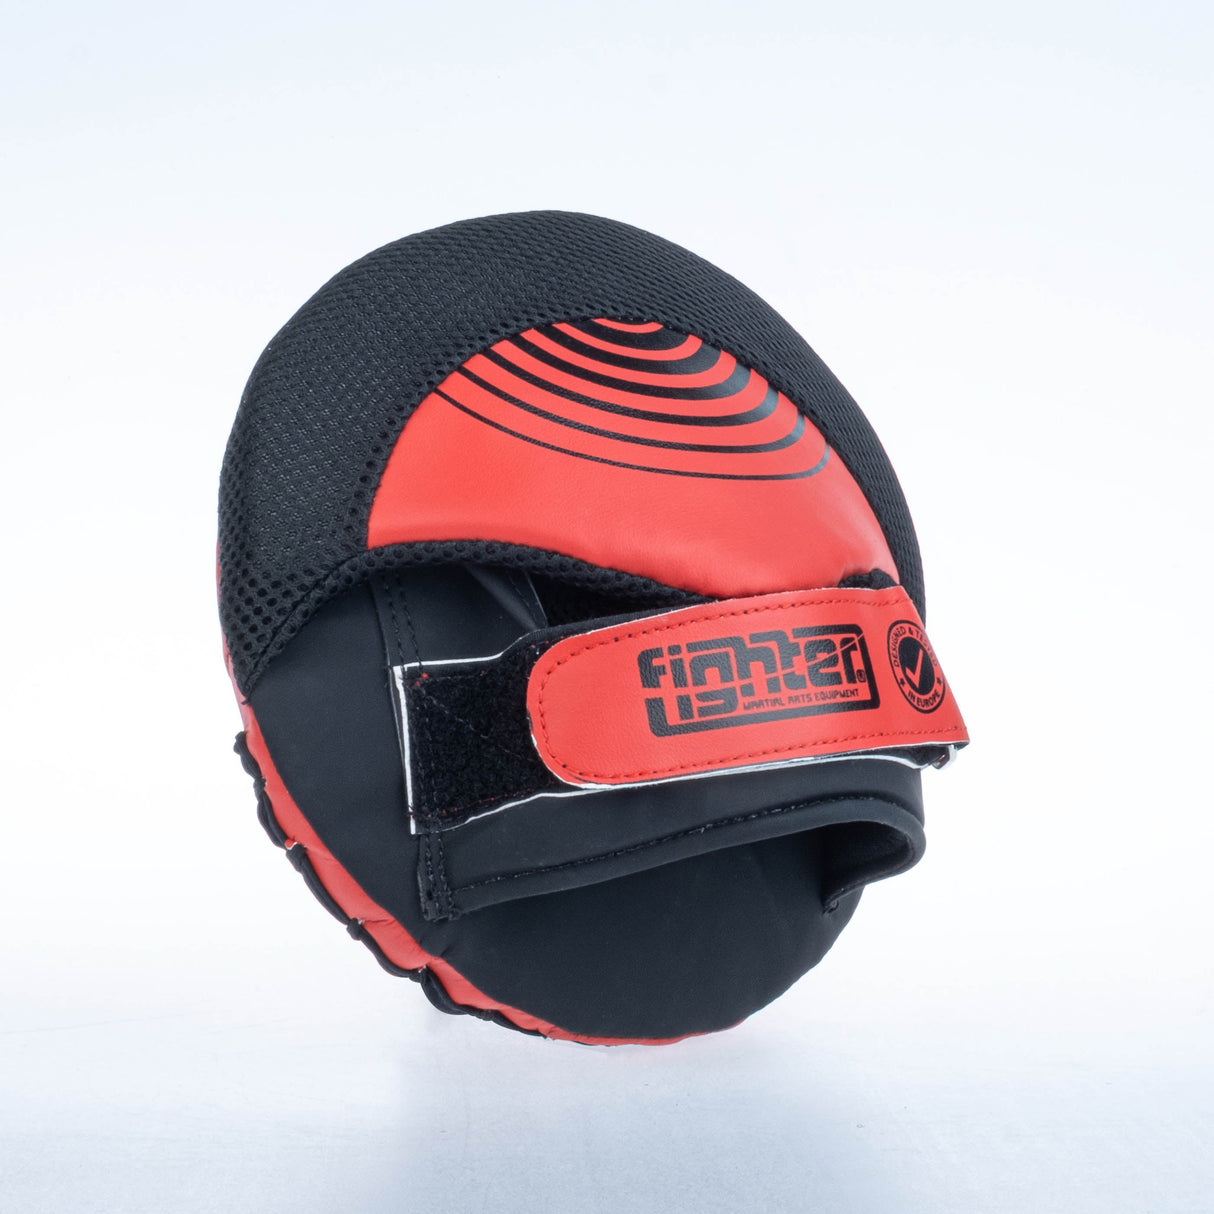 Fighter Round Shield Pro Small - noir/rouge, FSMPR-001-RB